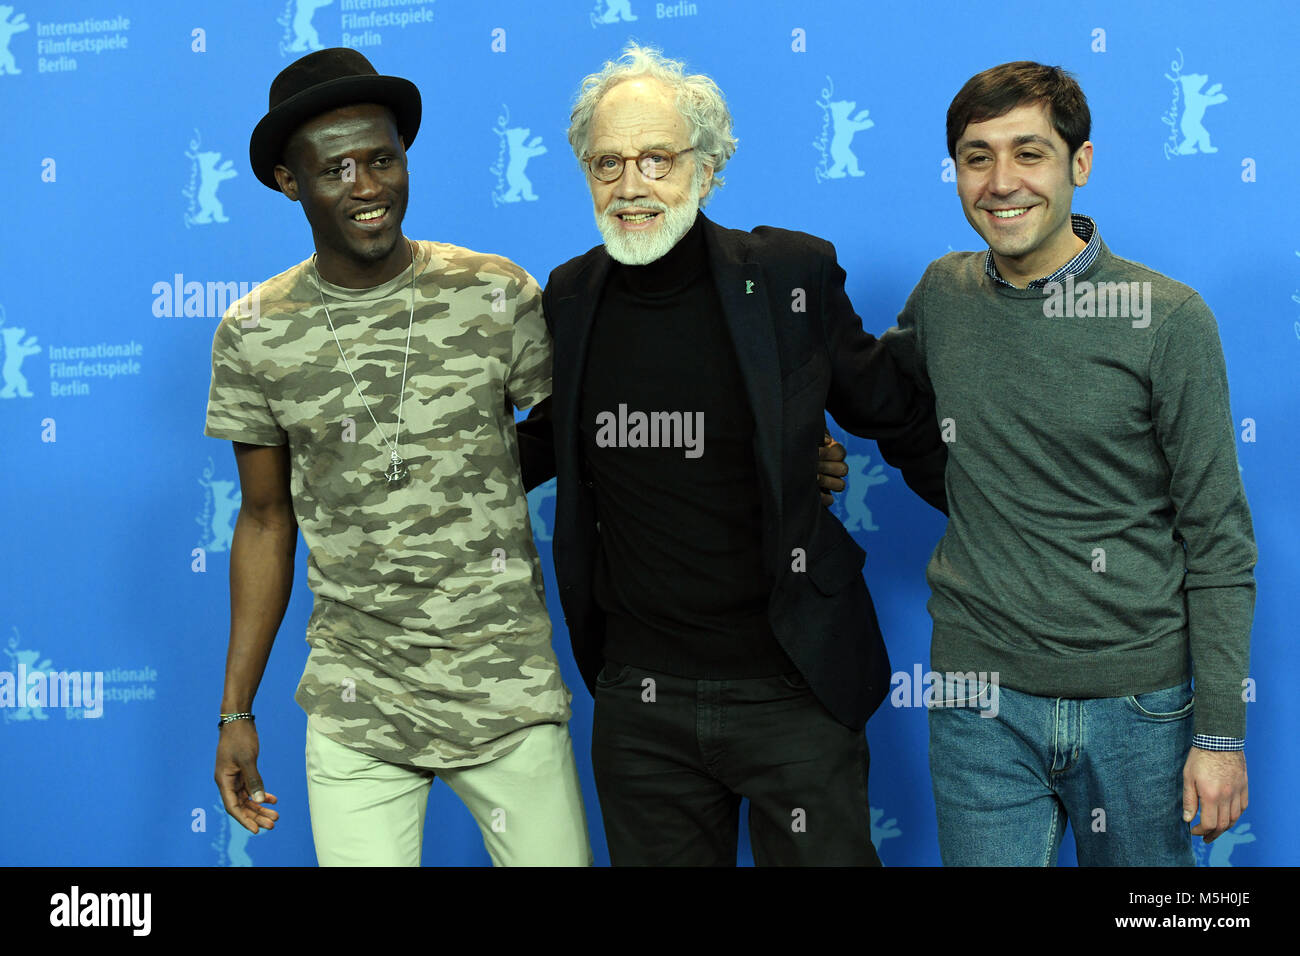 22 Febuary 2018, Germany, Berlin: Berlinale, photo session, 'Eldorado': Actor Akhet Téwendé (L-R), director Markus Imhoof, actor Raffaele Falcone. The film is running out of competition as part of the Berlinale. Credit: dpa picture alliance/Alamy Live News Stock Photo